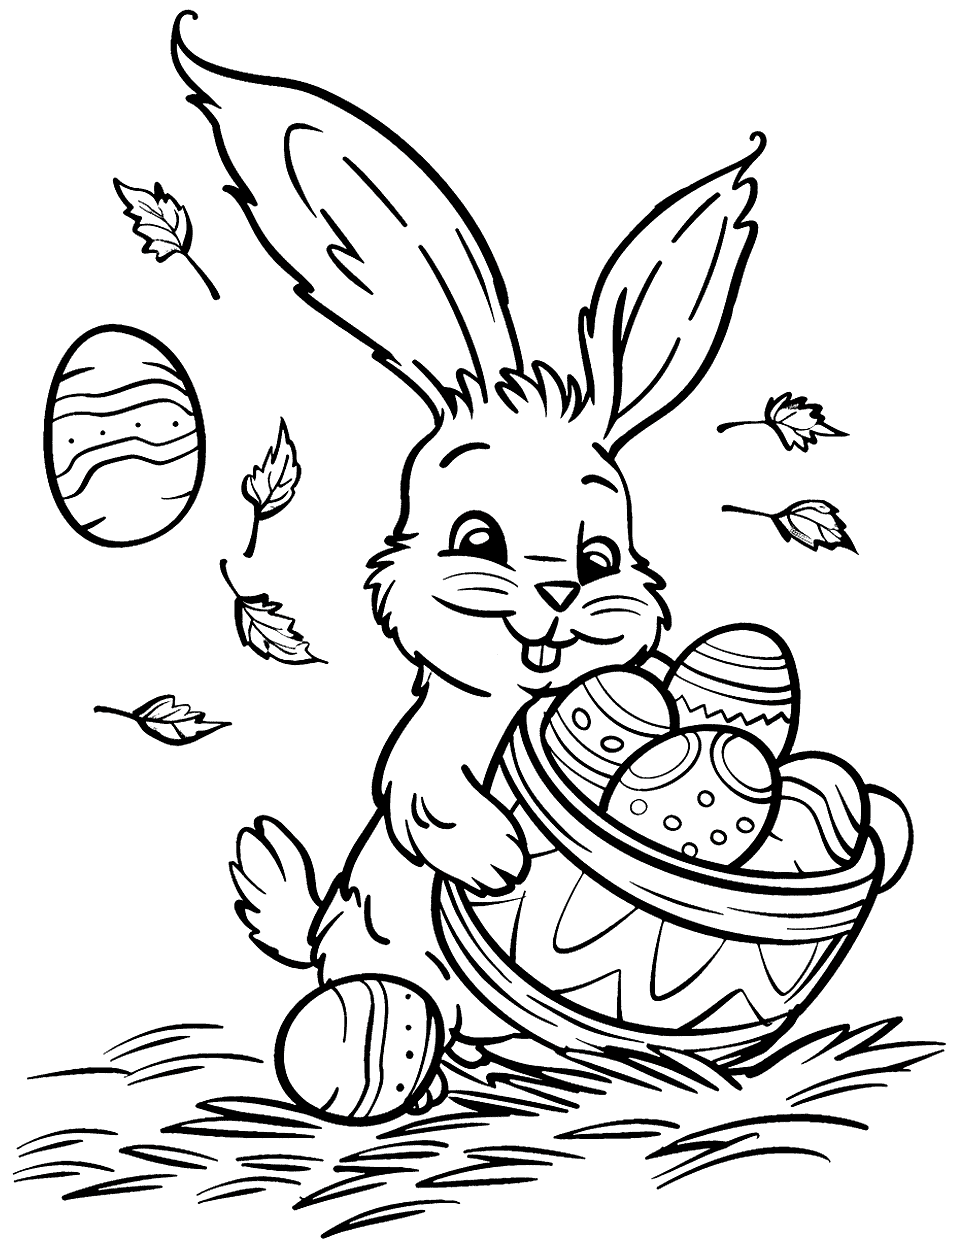 Bunny's Windy Day Easter Bunny Coloring Page - A bunny struggling to hold onto a bunch of Easter eggs as a strong wind blows, with leaves swirling around.